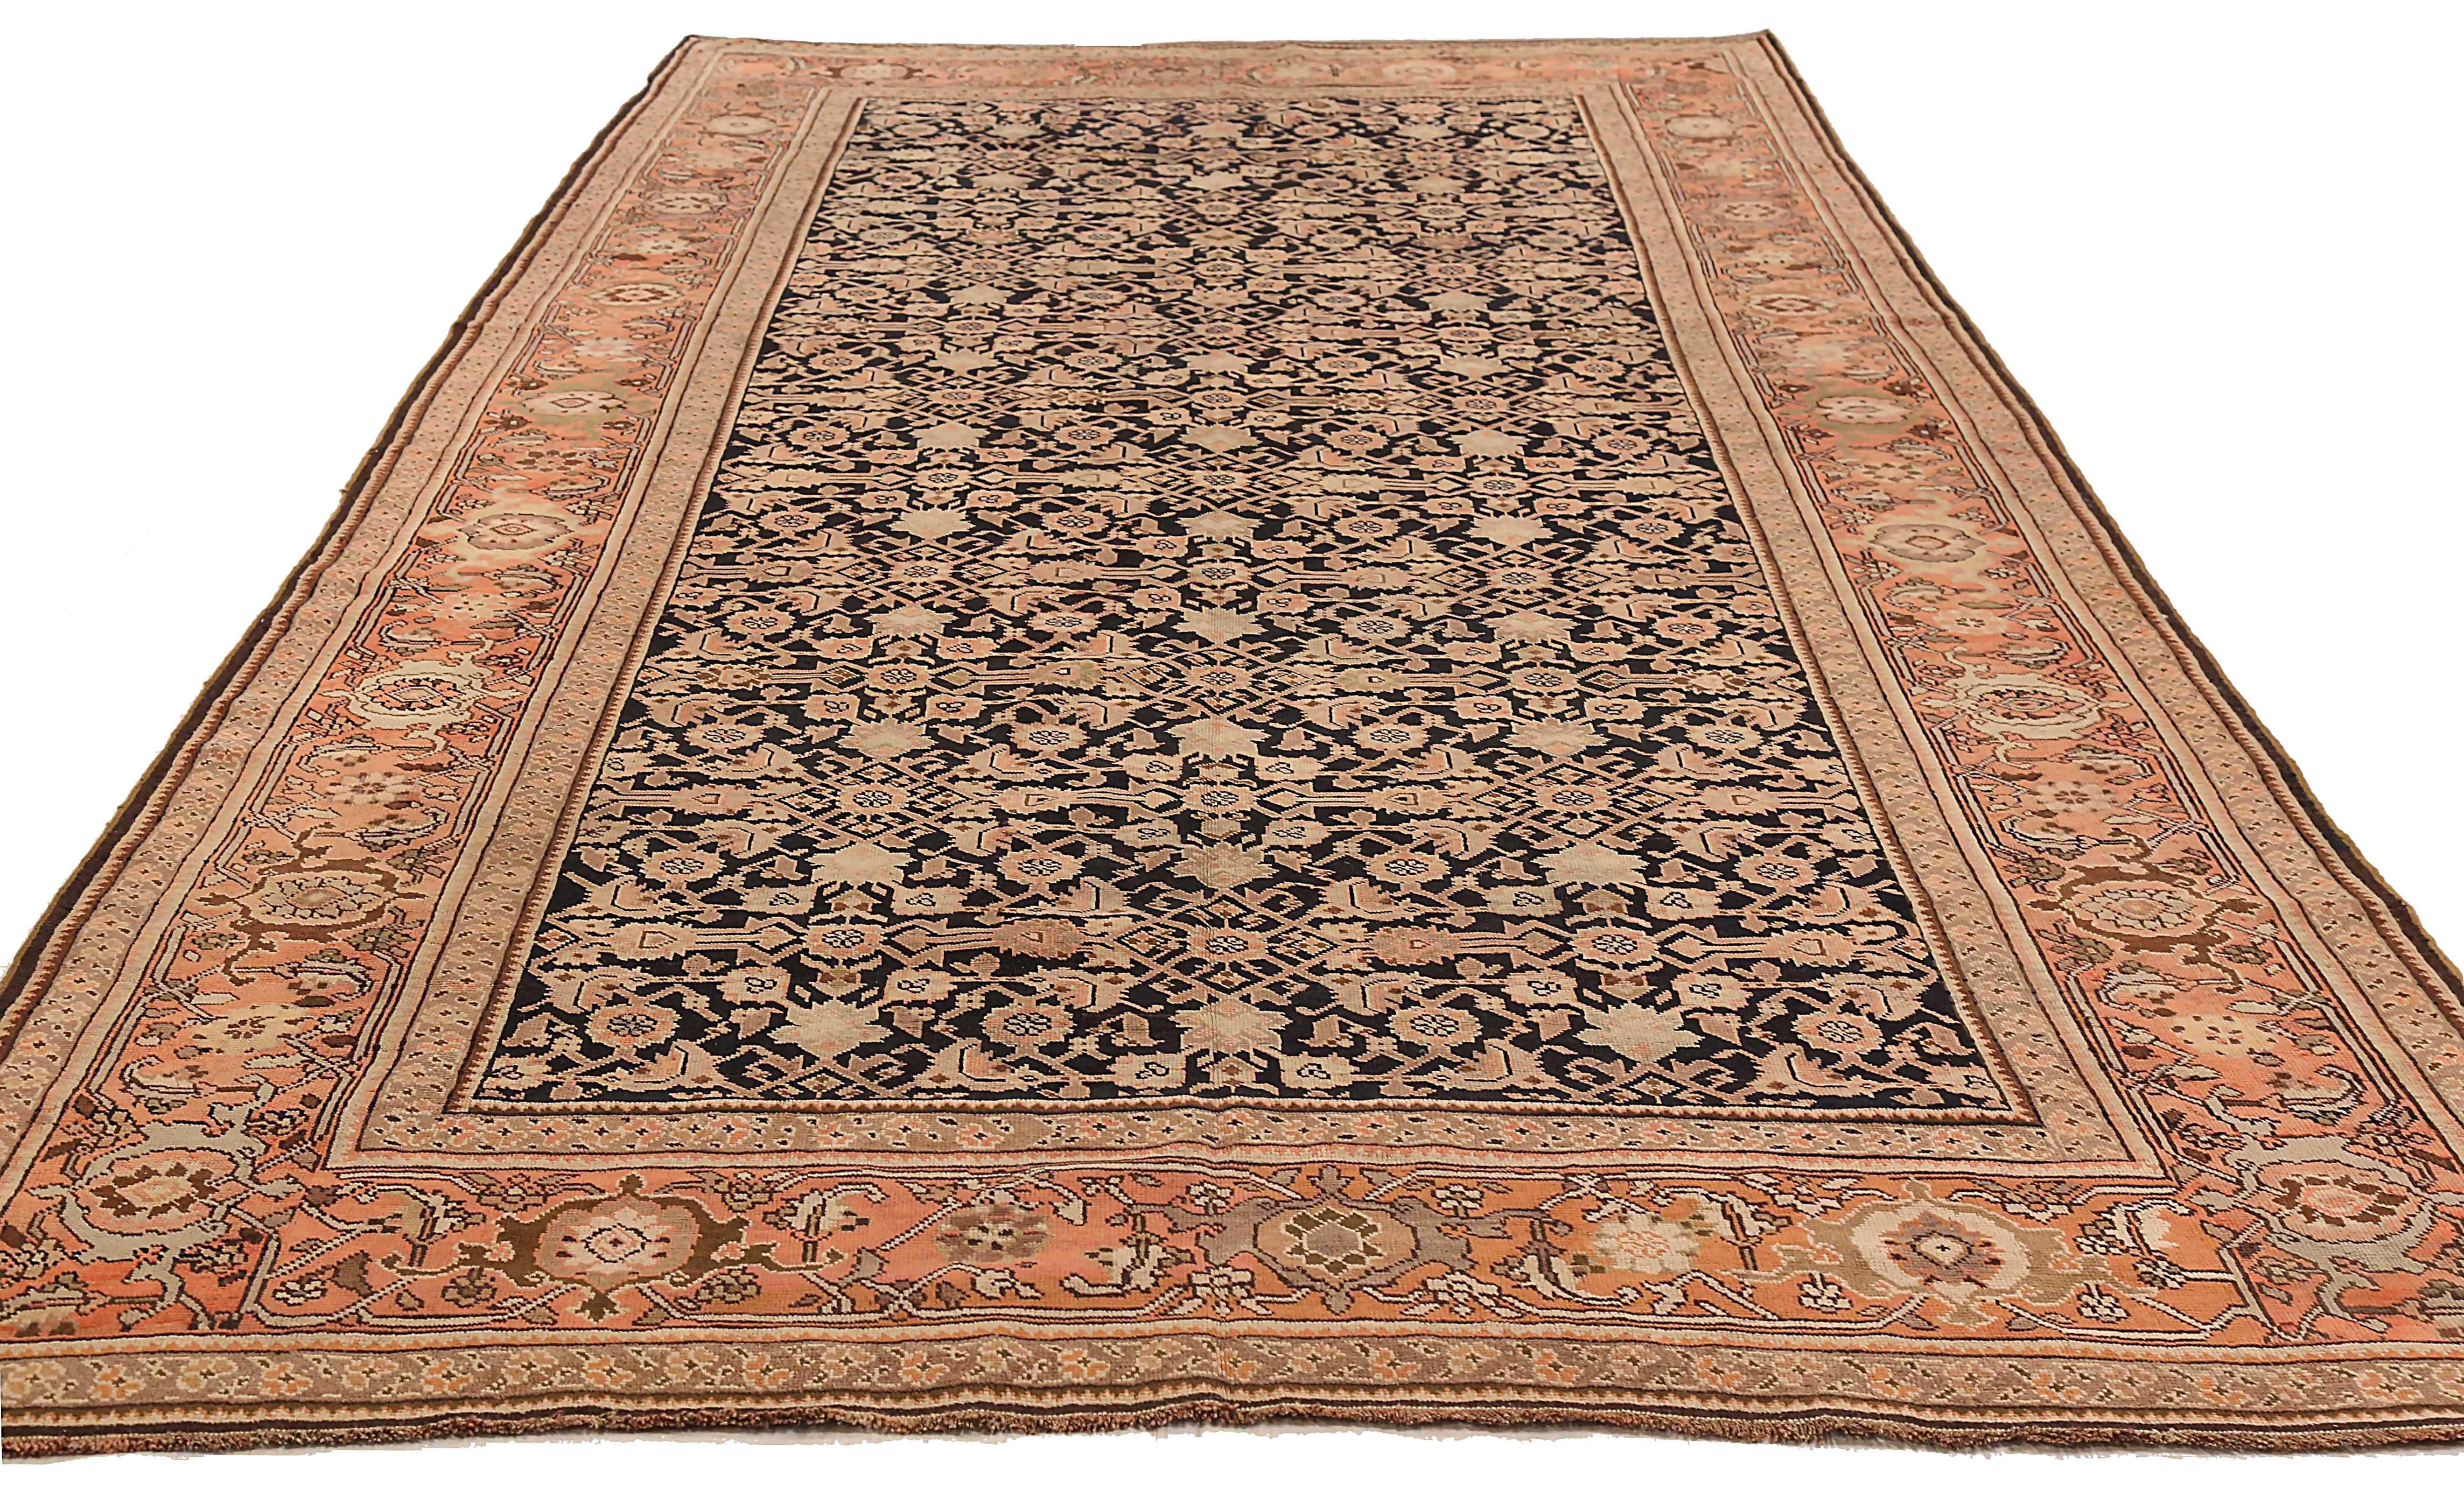 Antique Russian area rug handwoven from the finest sheep’s wool. It’s colored with all-natural vegetable dyes that are safe for humans and pets. It’s a traditional Karebagh design handwoven by expert artisans. It’s a lovely area rug that can be